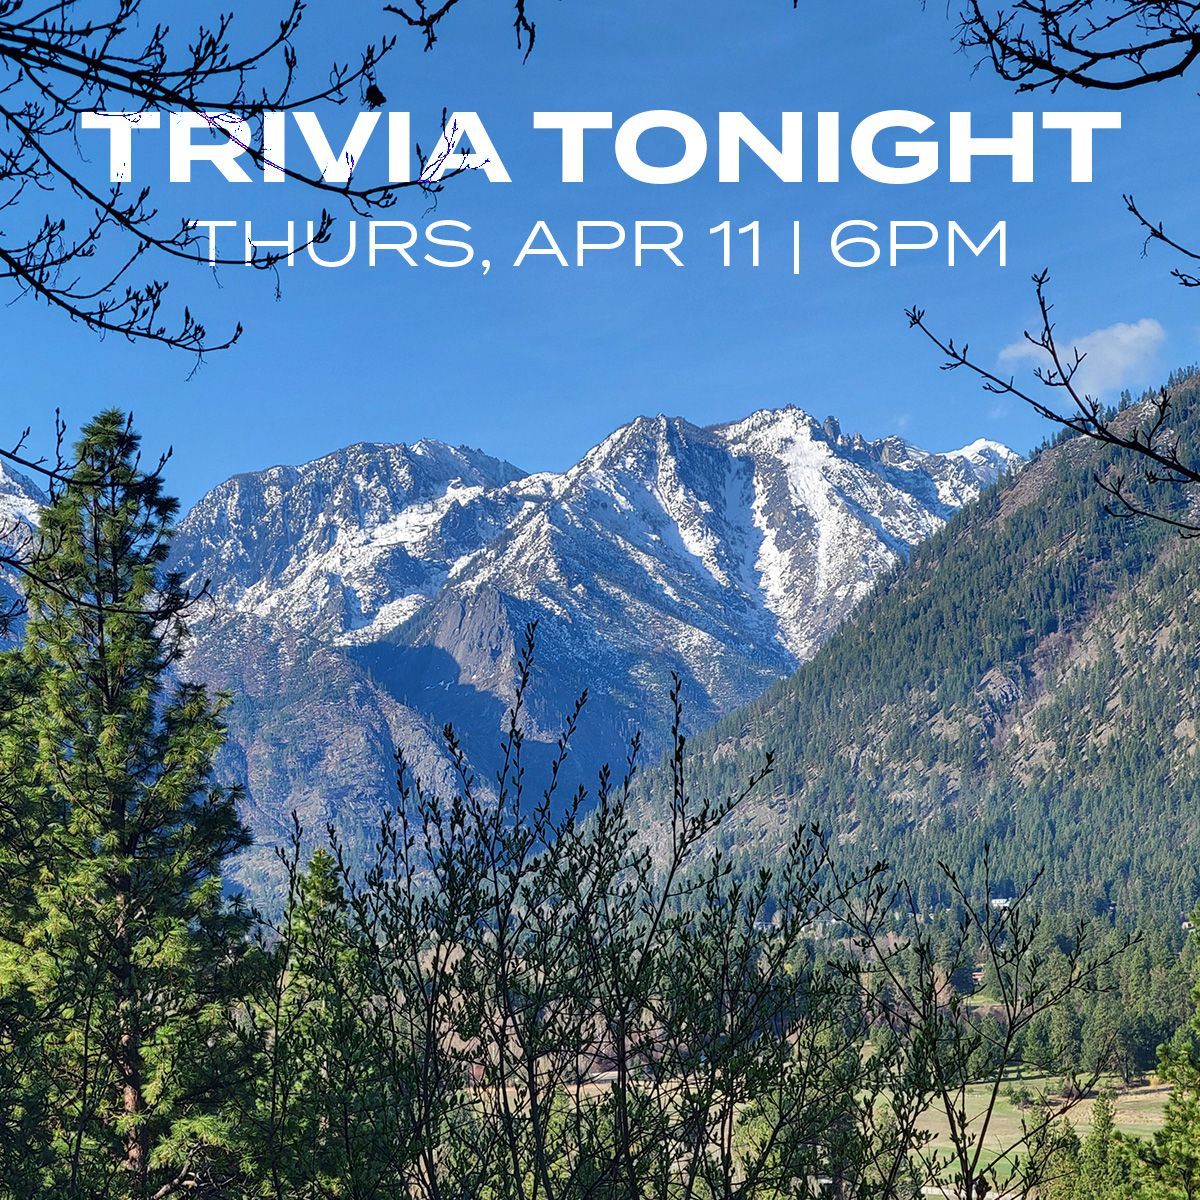 Assemble your team and let's get our trivia on tonight at 6pm! Great beers, good company, and random factoids make for a fine evening; see you tonight!